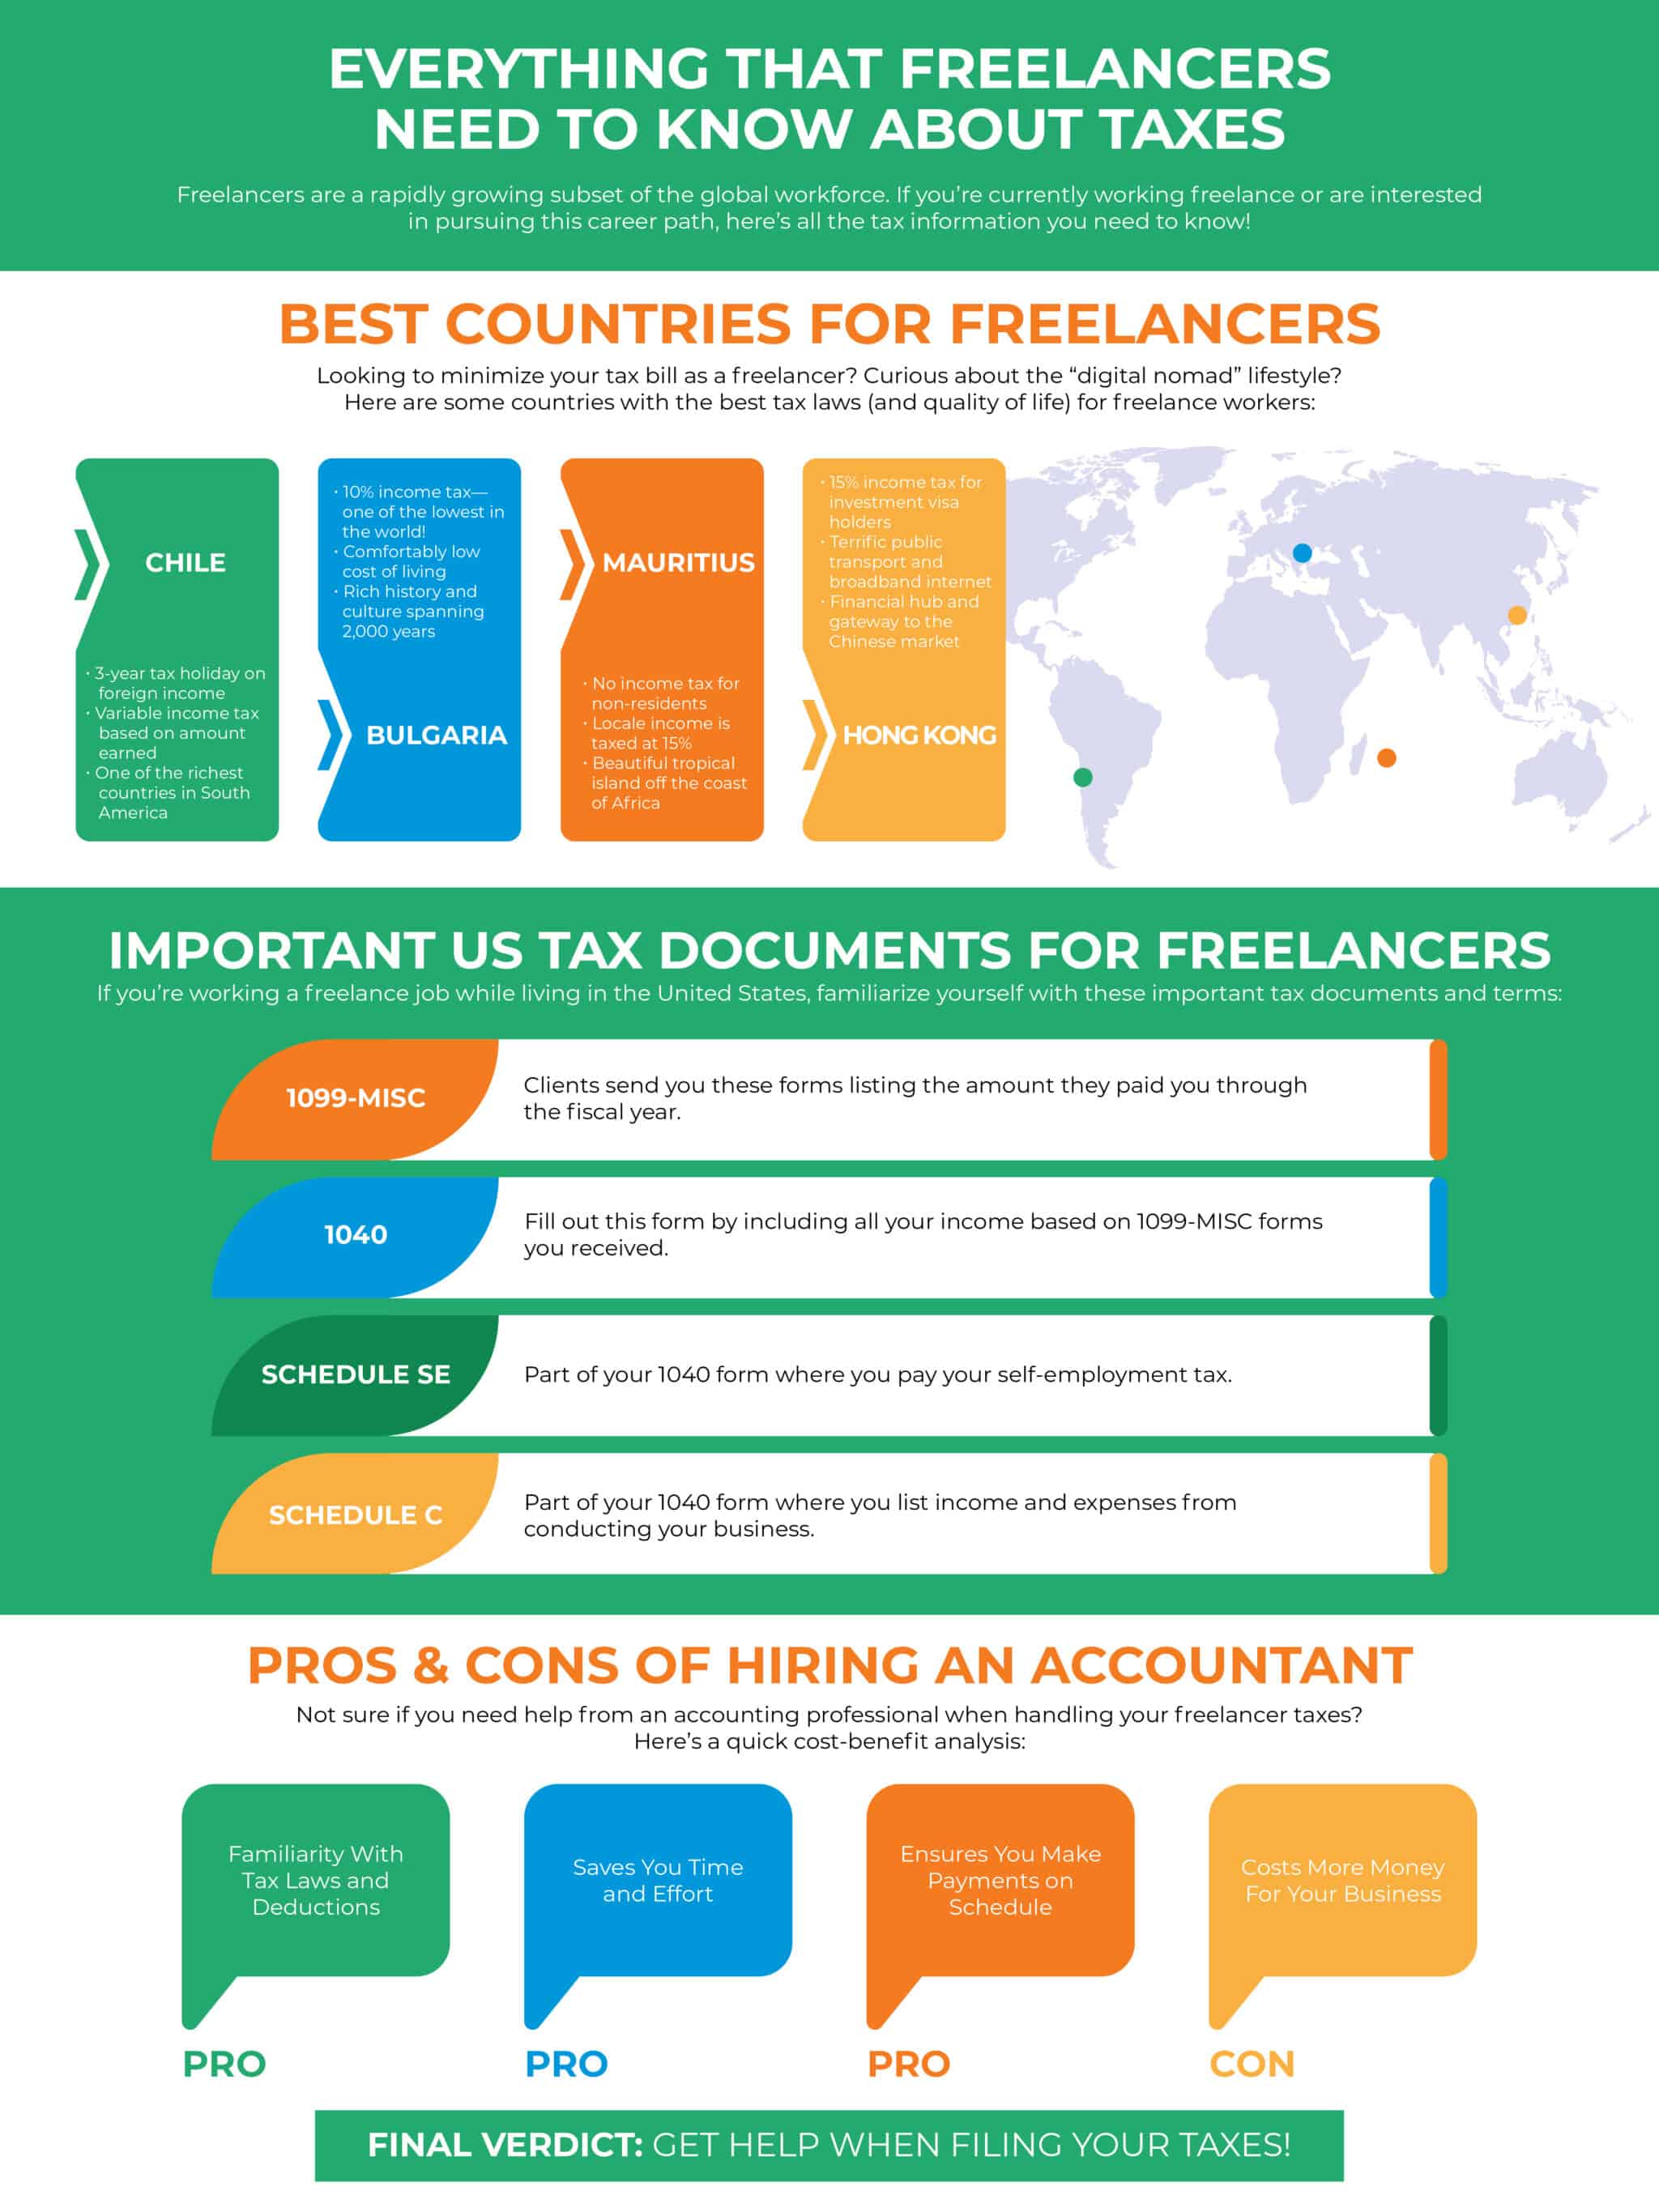 Best Countries for Freelance Taxes